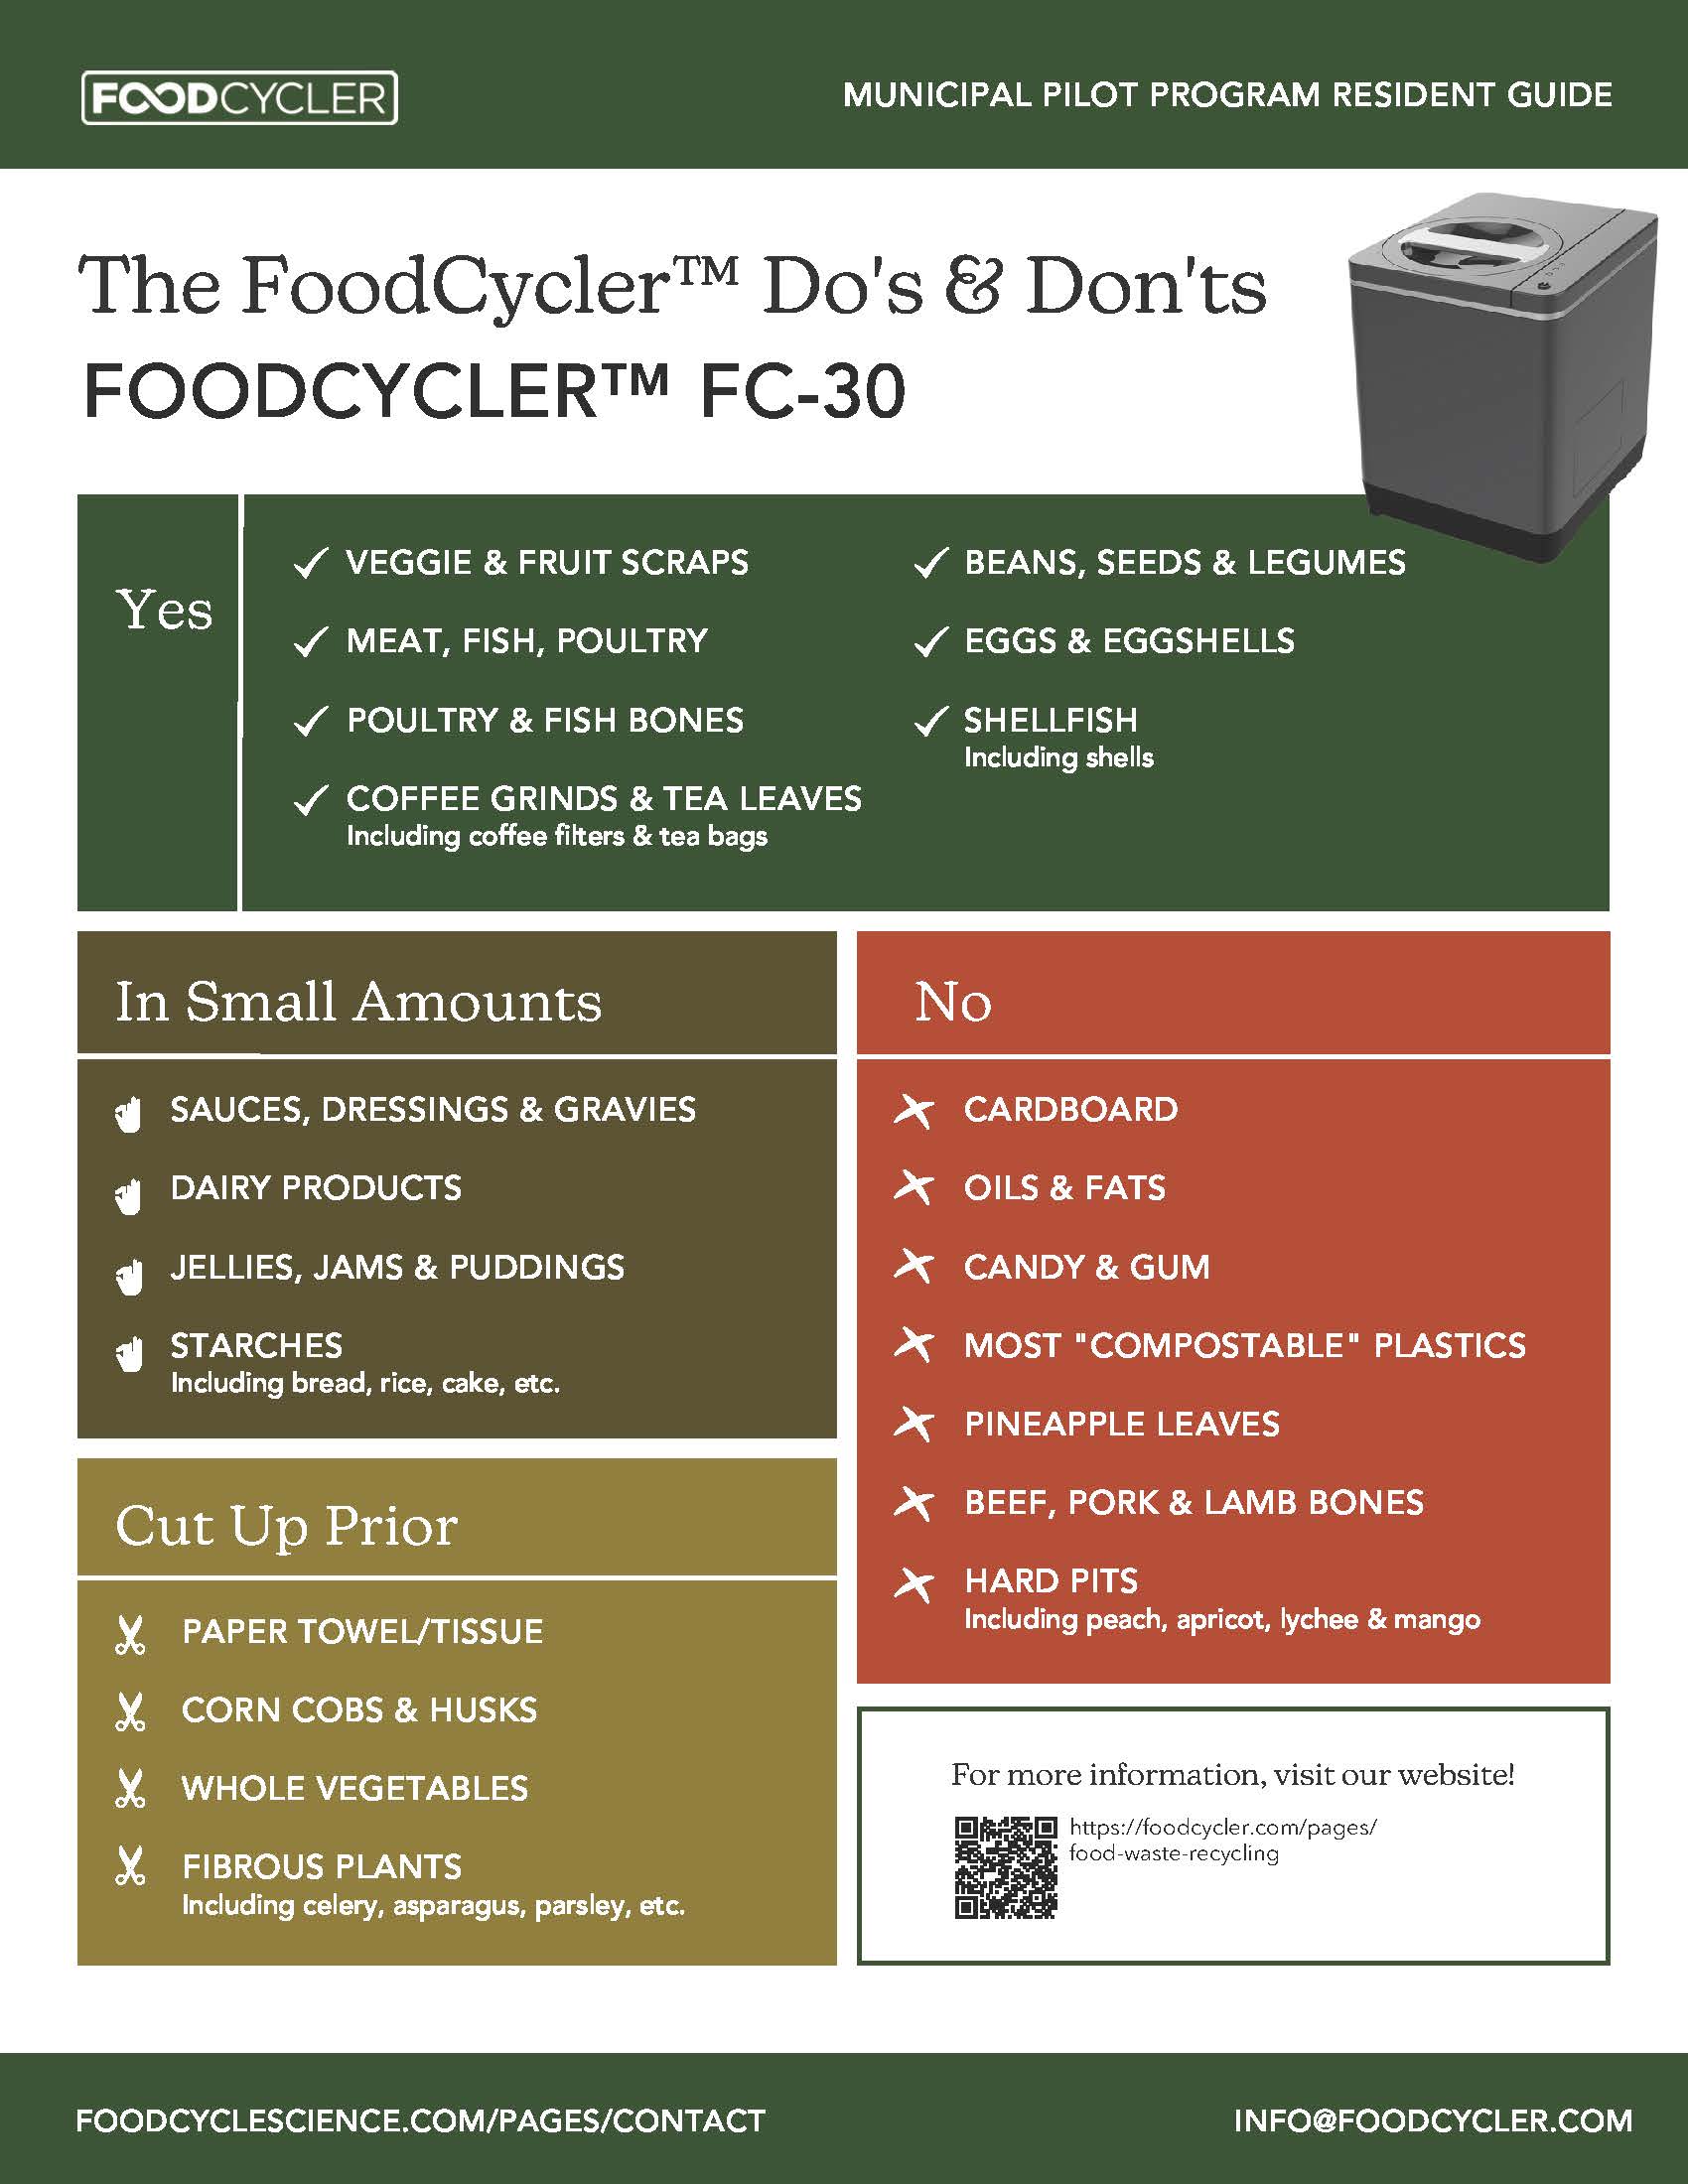 do's and don'ts for the FC-30 poster